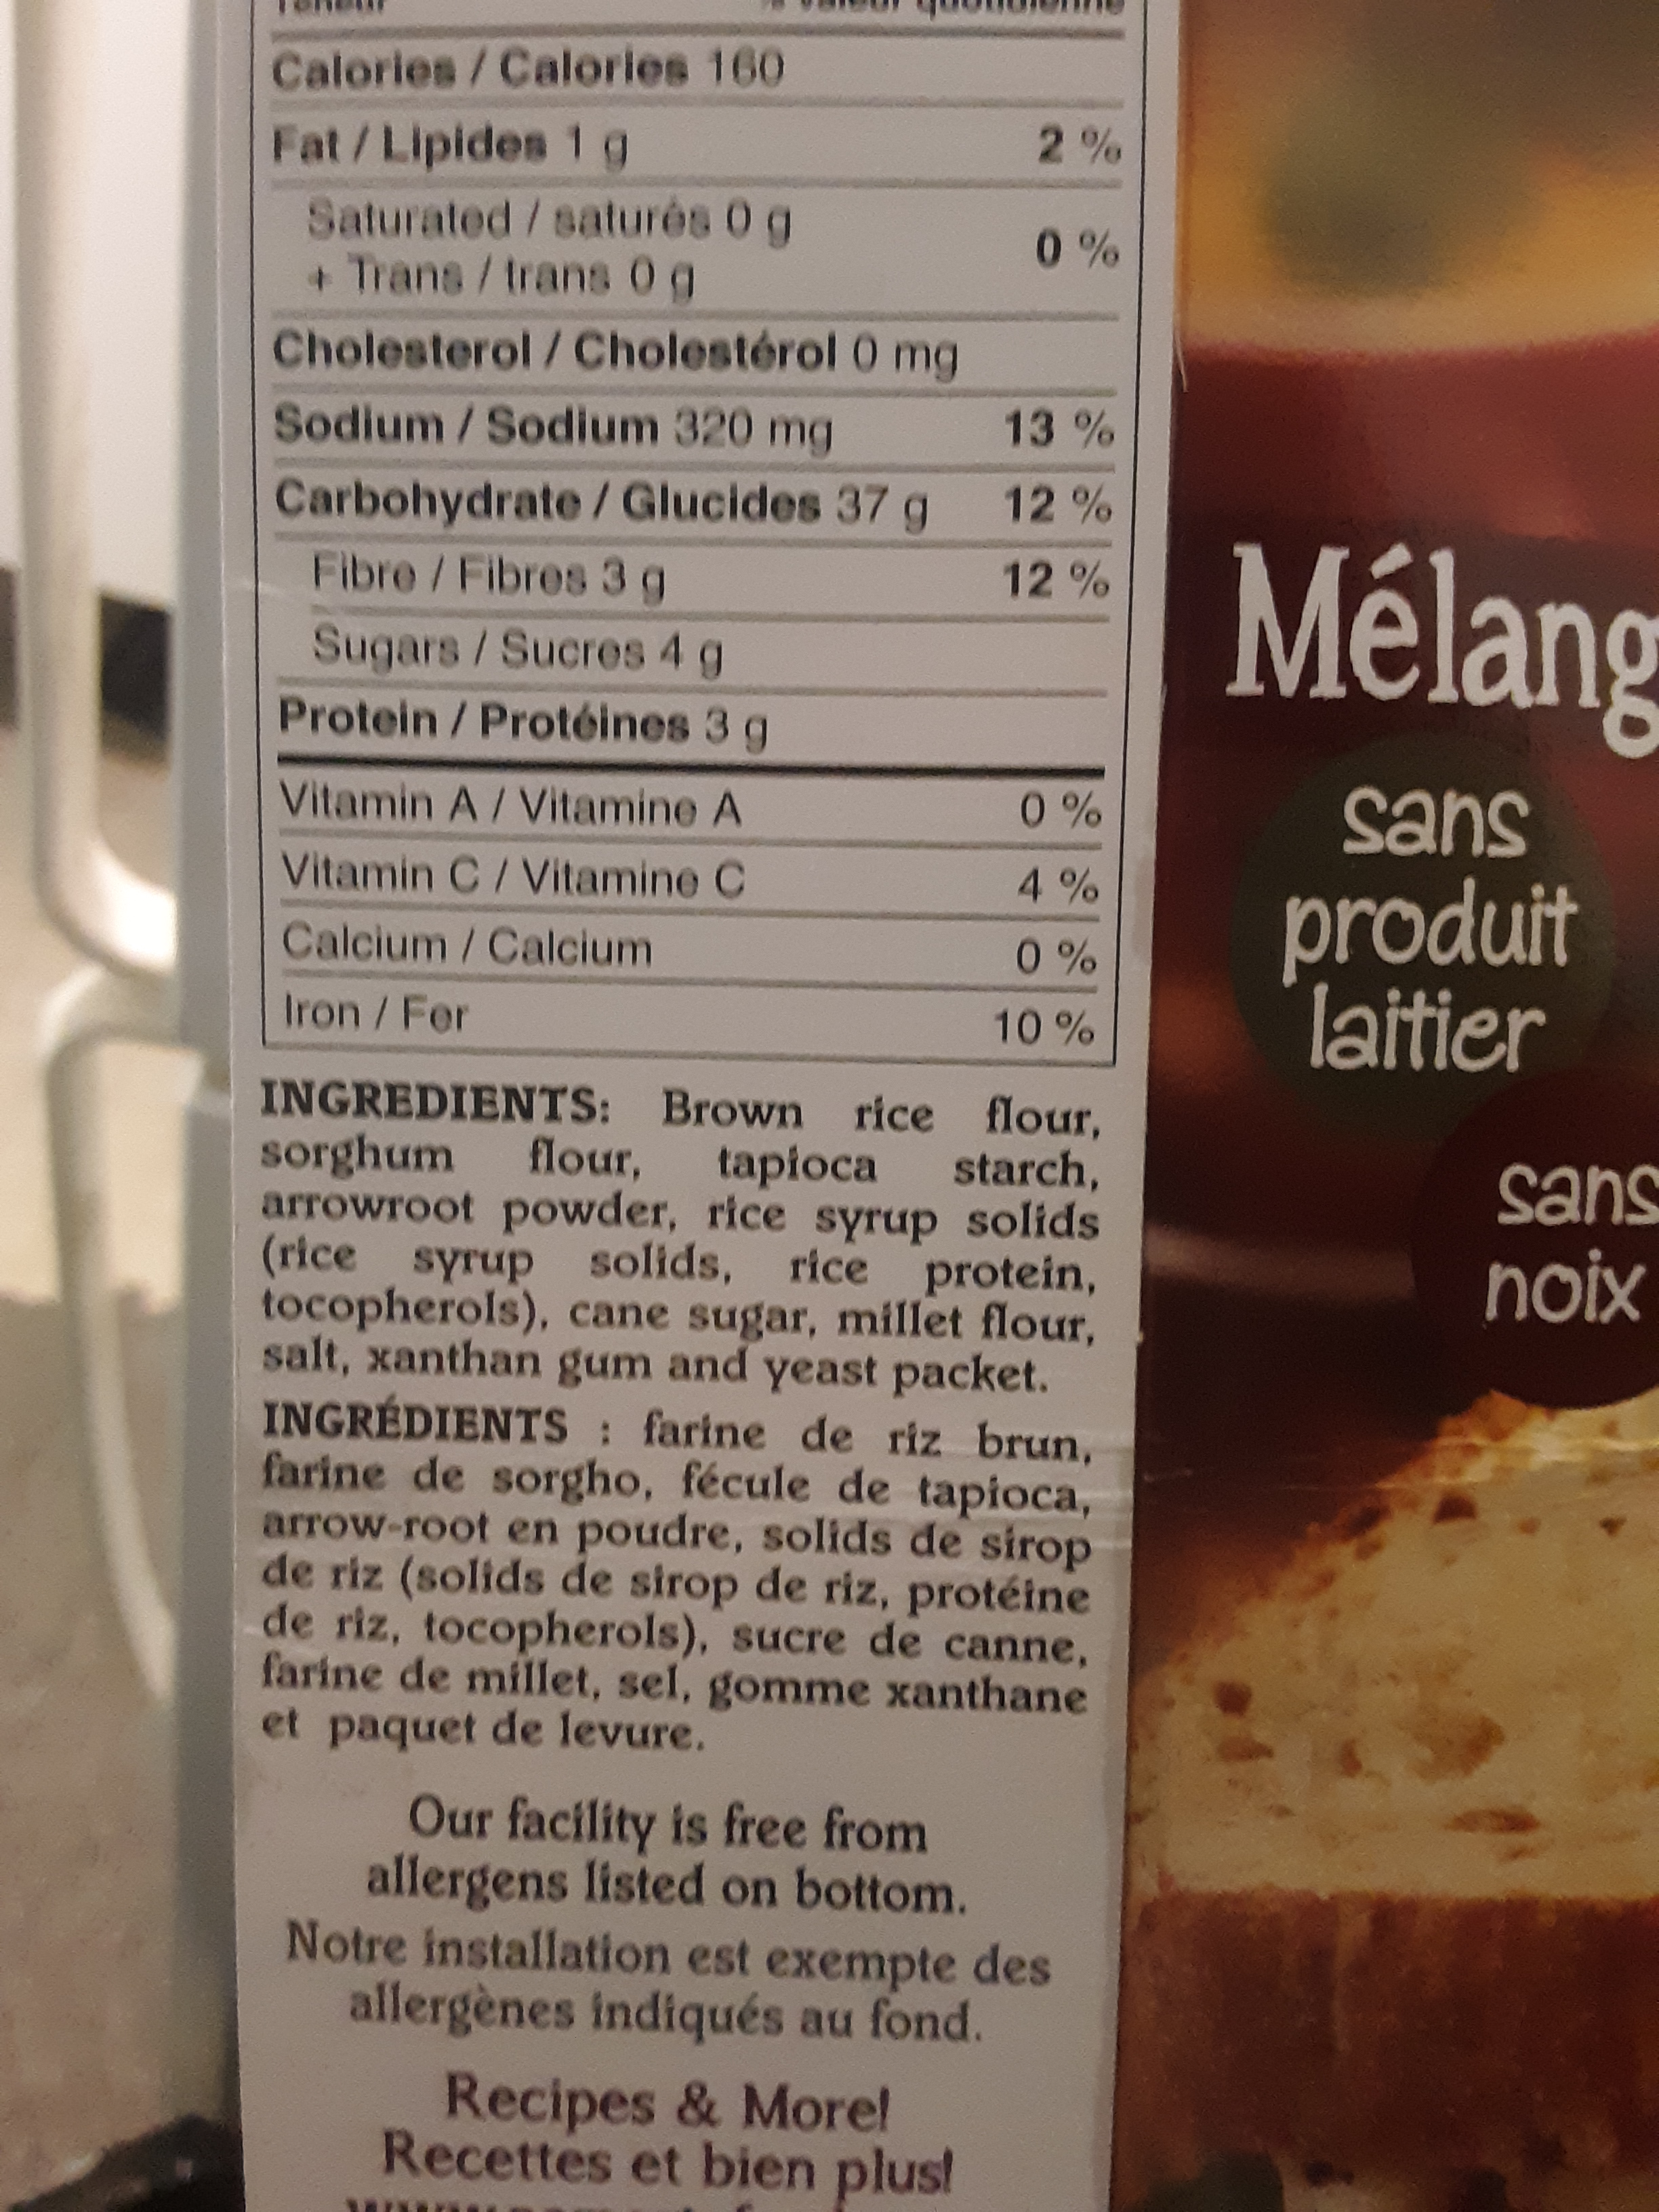 Living well in the 21st century - Limassol, Cyprus - 
nutrition label picture and ingredient on the side of the package. 

Nutrition label
calories 160 
Fat / lipides 1g     2%
Satured / satures  0g    0%
+ Trans / trans 0g
Cholesterol    0mg
Sodium  320mg      13%
Carbohydrate / Glucides  37g   12%
Fibre / Fibres  3g        12%
Sugar / Sucres 4g
Protein / Proteines  3g
 
Vitamin A / vitamine A   0%
Vitamin C / vitamine C   4%
Calcium                           0%
Iron/ Fer                          10%

Ingredients: Brown rice flour, sorghum flour, tapioca starch, arrowroot powder, rice syrup solids (rice syrup solids, rice protein, tocopherols), cane sugar, millet flour, salt, xanthan gum, and yeast packet. 

Ingredients: farine de riz brun, farine de sorgho, fecule de tapioca, arrow-root en poudre, solids de sirop de riz (solids de sirop de riz, proteine de riz, tocopherols), sucre de canne, farine de millet, sel, gomme xanthane et paquet de levure. 

Our facility is free from allergens listed on bottom
Notre installation est exempte des allergenes indiques au fond

Recipes & More!
Recettes et bien plus!